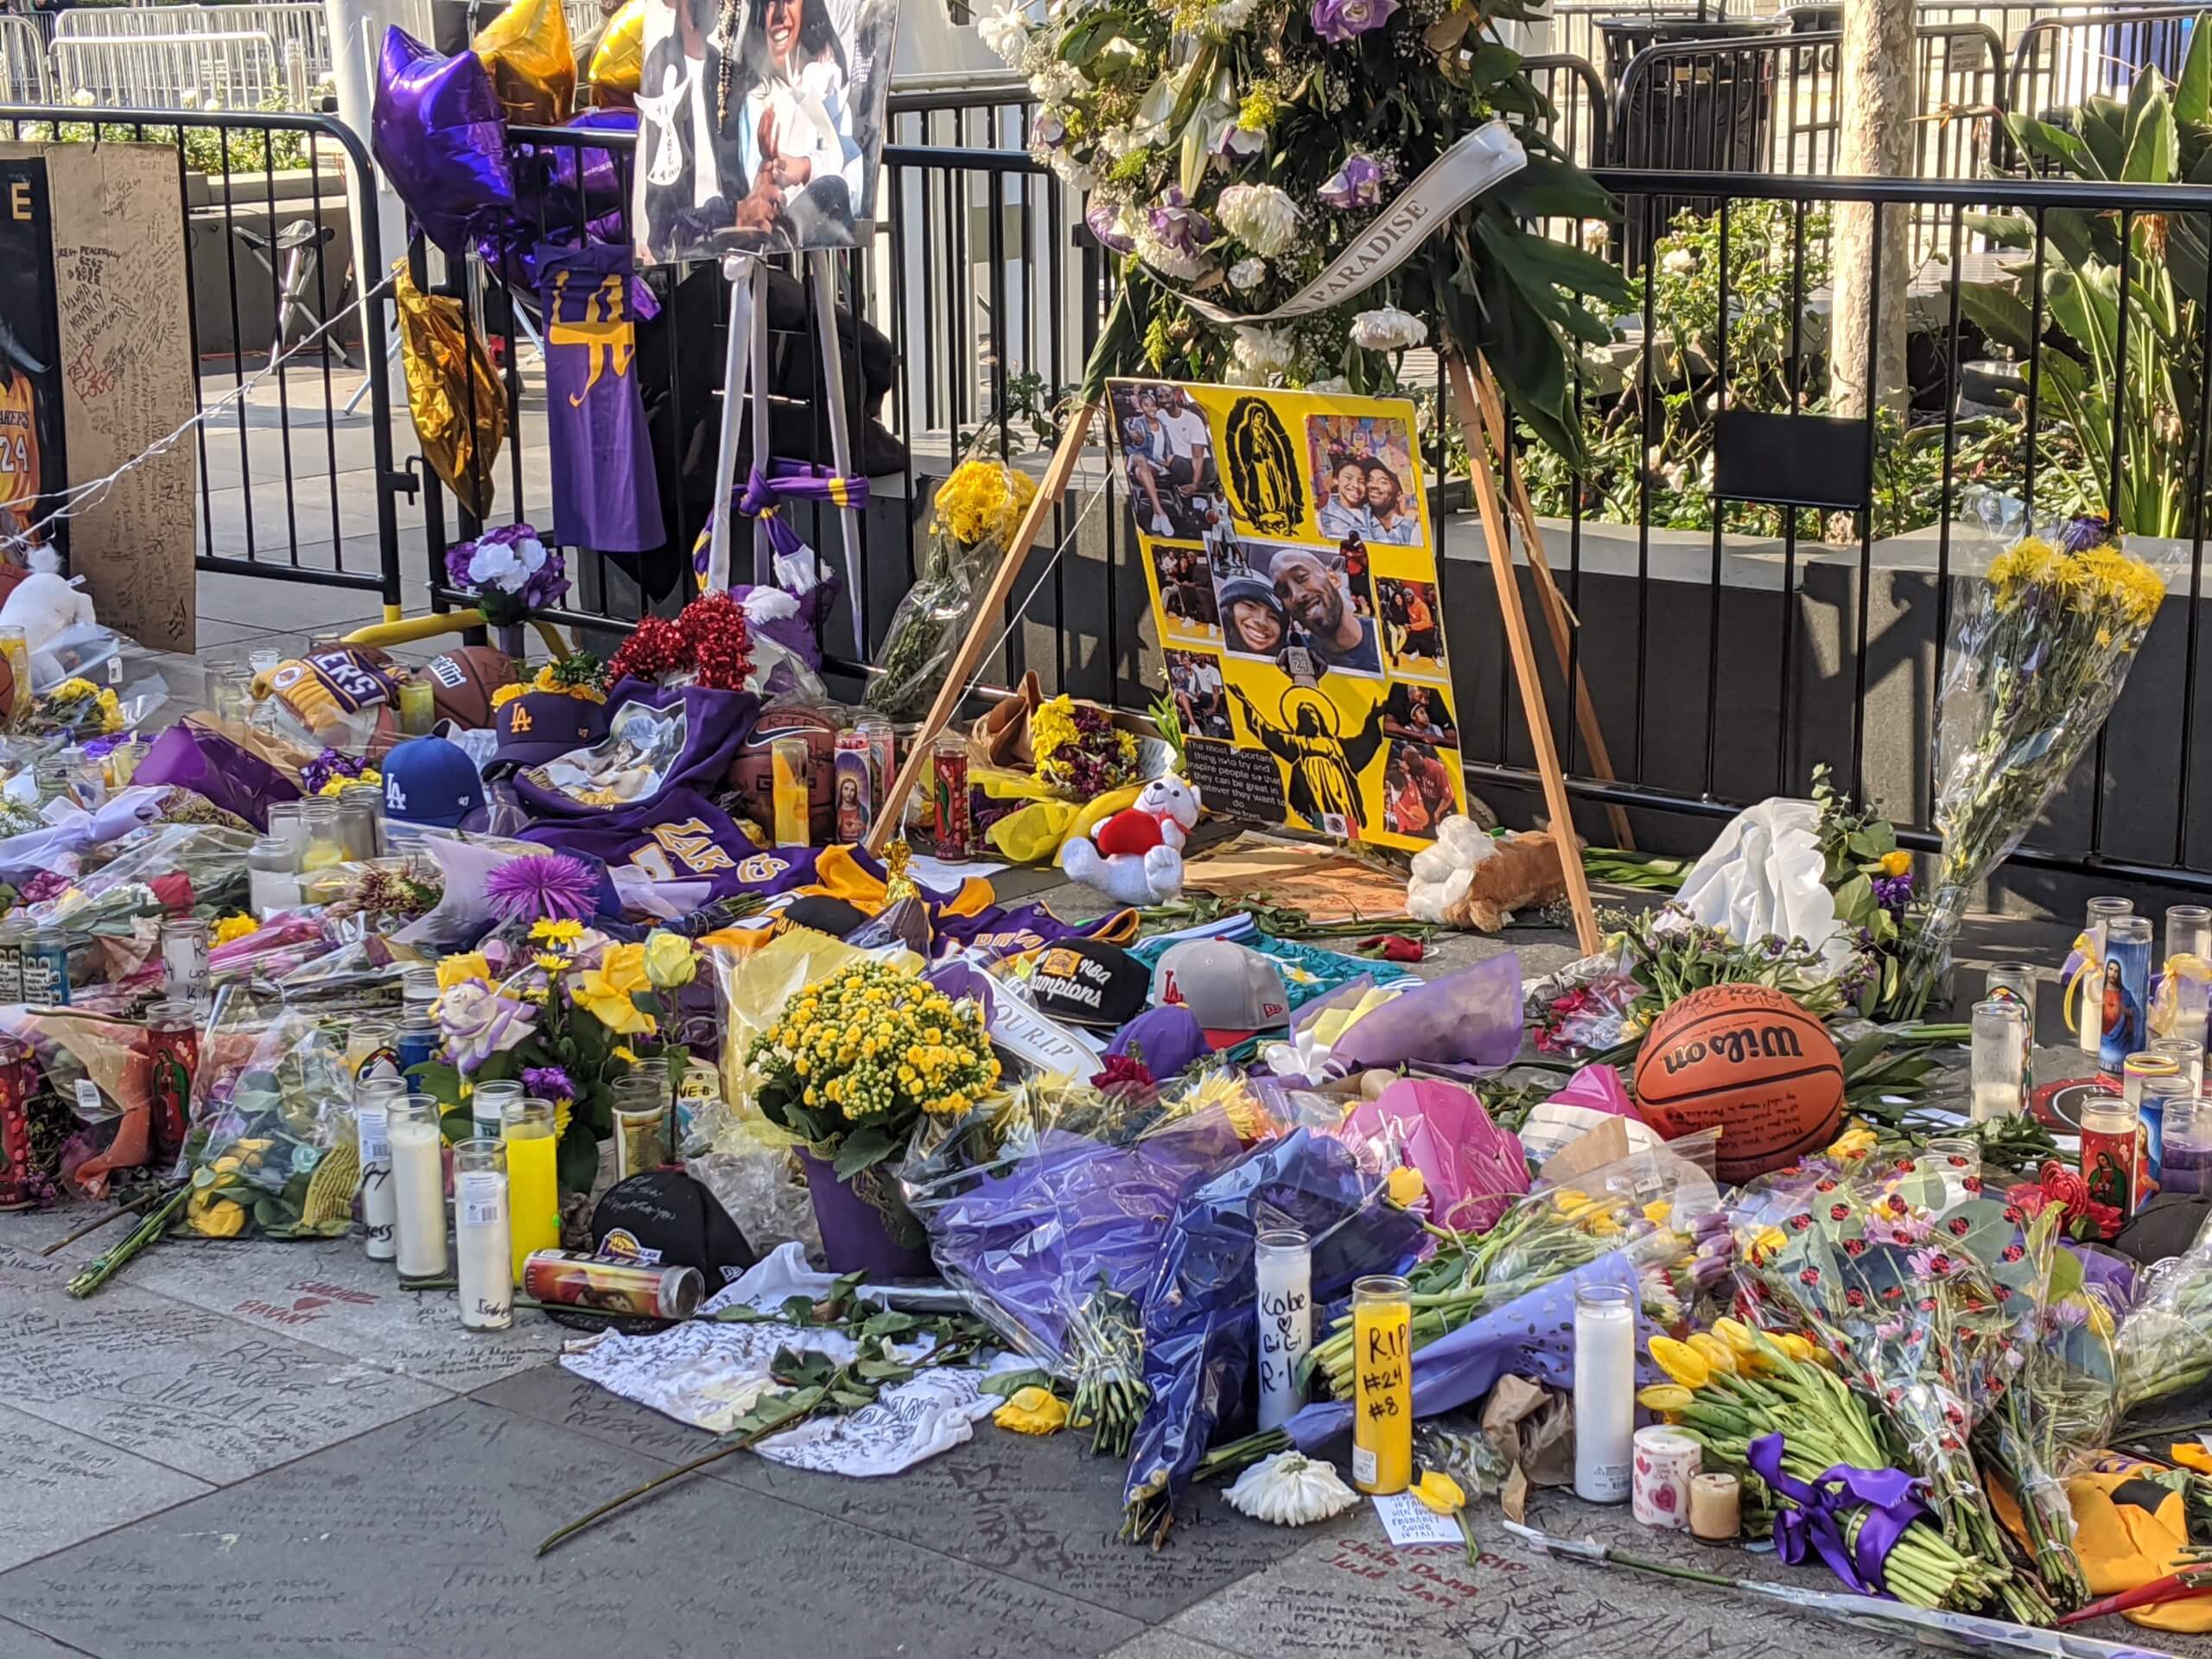 Top 5 Photos, 1/27: World mourns the loss of Kobe Bryant